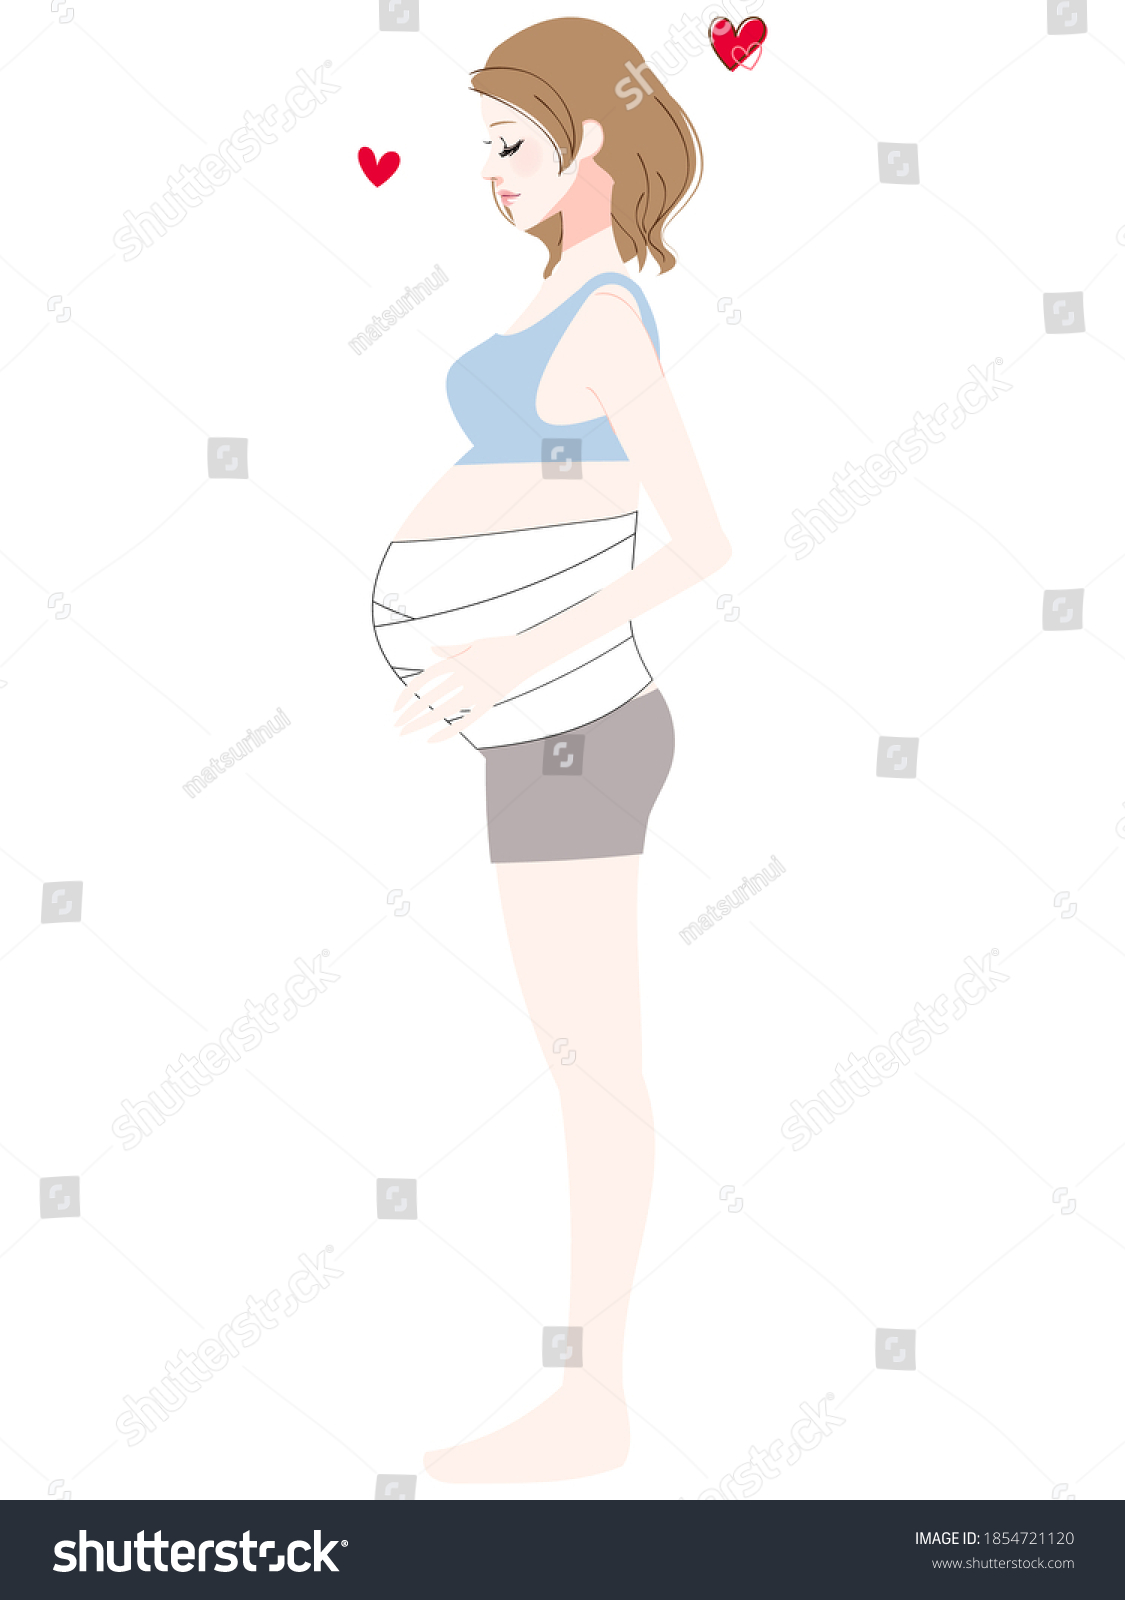 SVG of Illustration of a woman with a girth svg